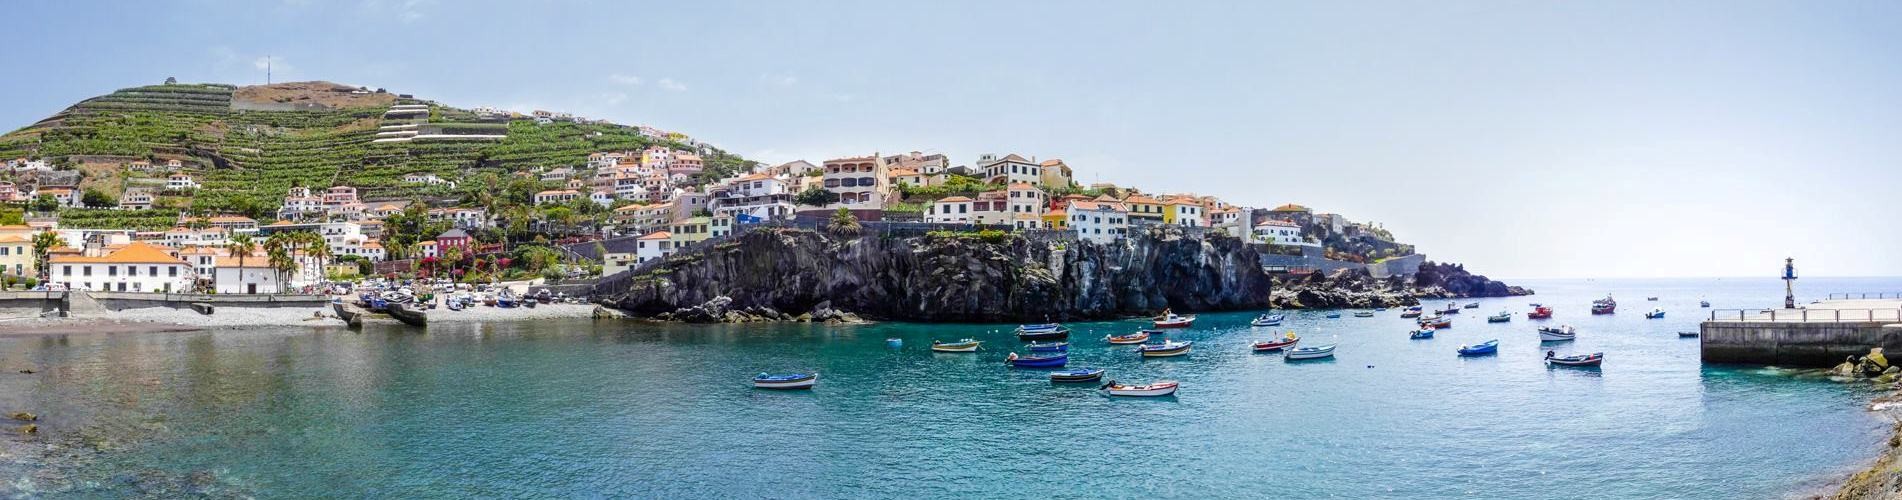 Sightseeing Tours in Madeira Island